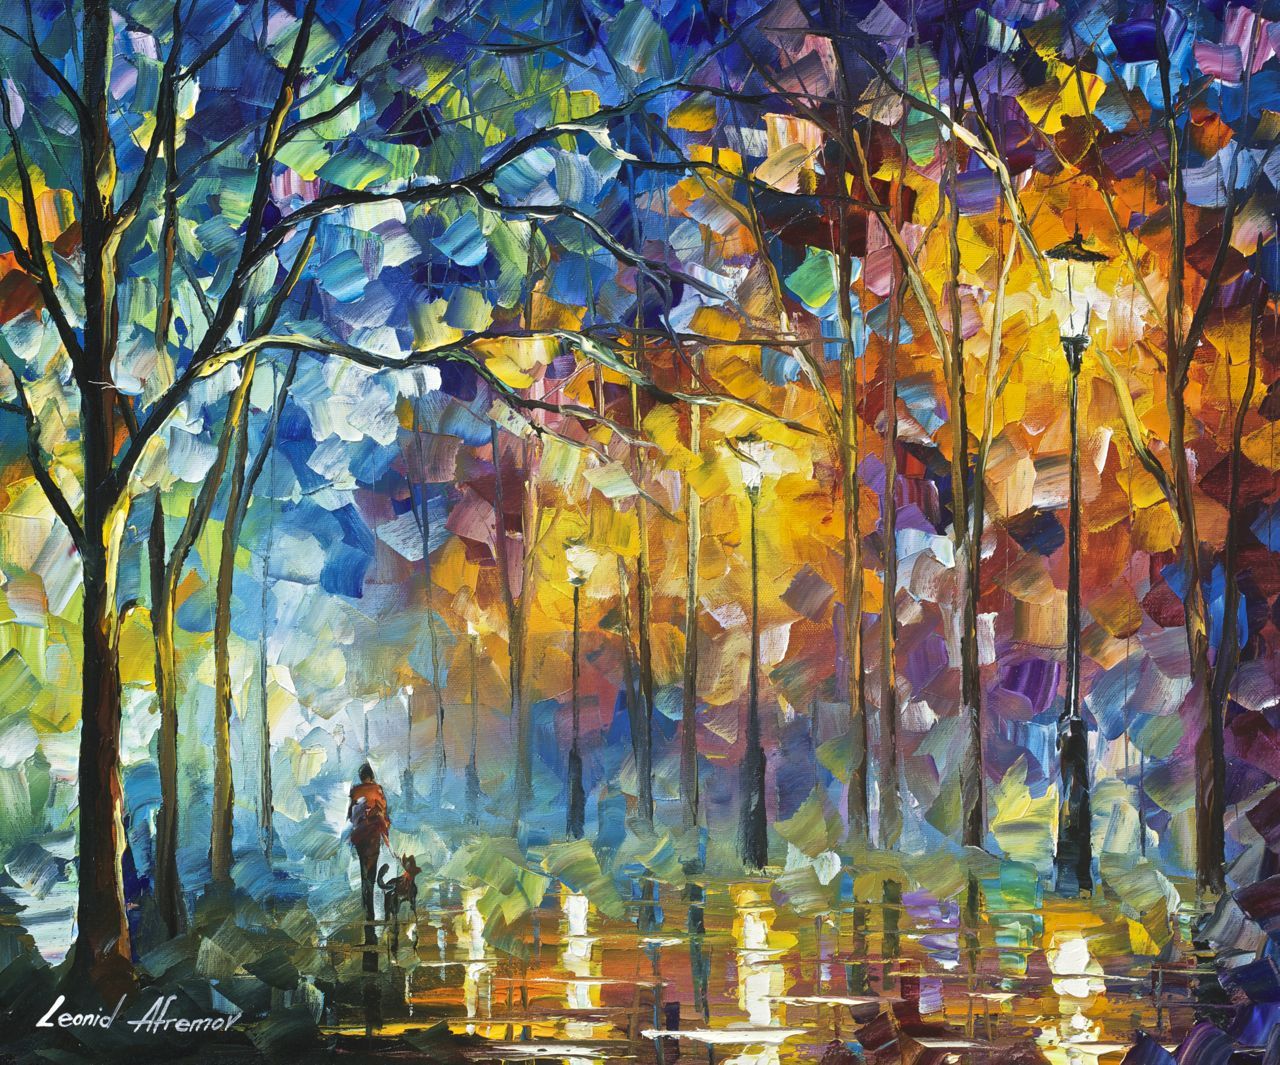 Friends Forever – Original Oil Painting – Wall Art Canvasleonid Afremov  – 54"x40" With Regard To Most Recent Oil Painting Wall Art (View 2 of 20)